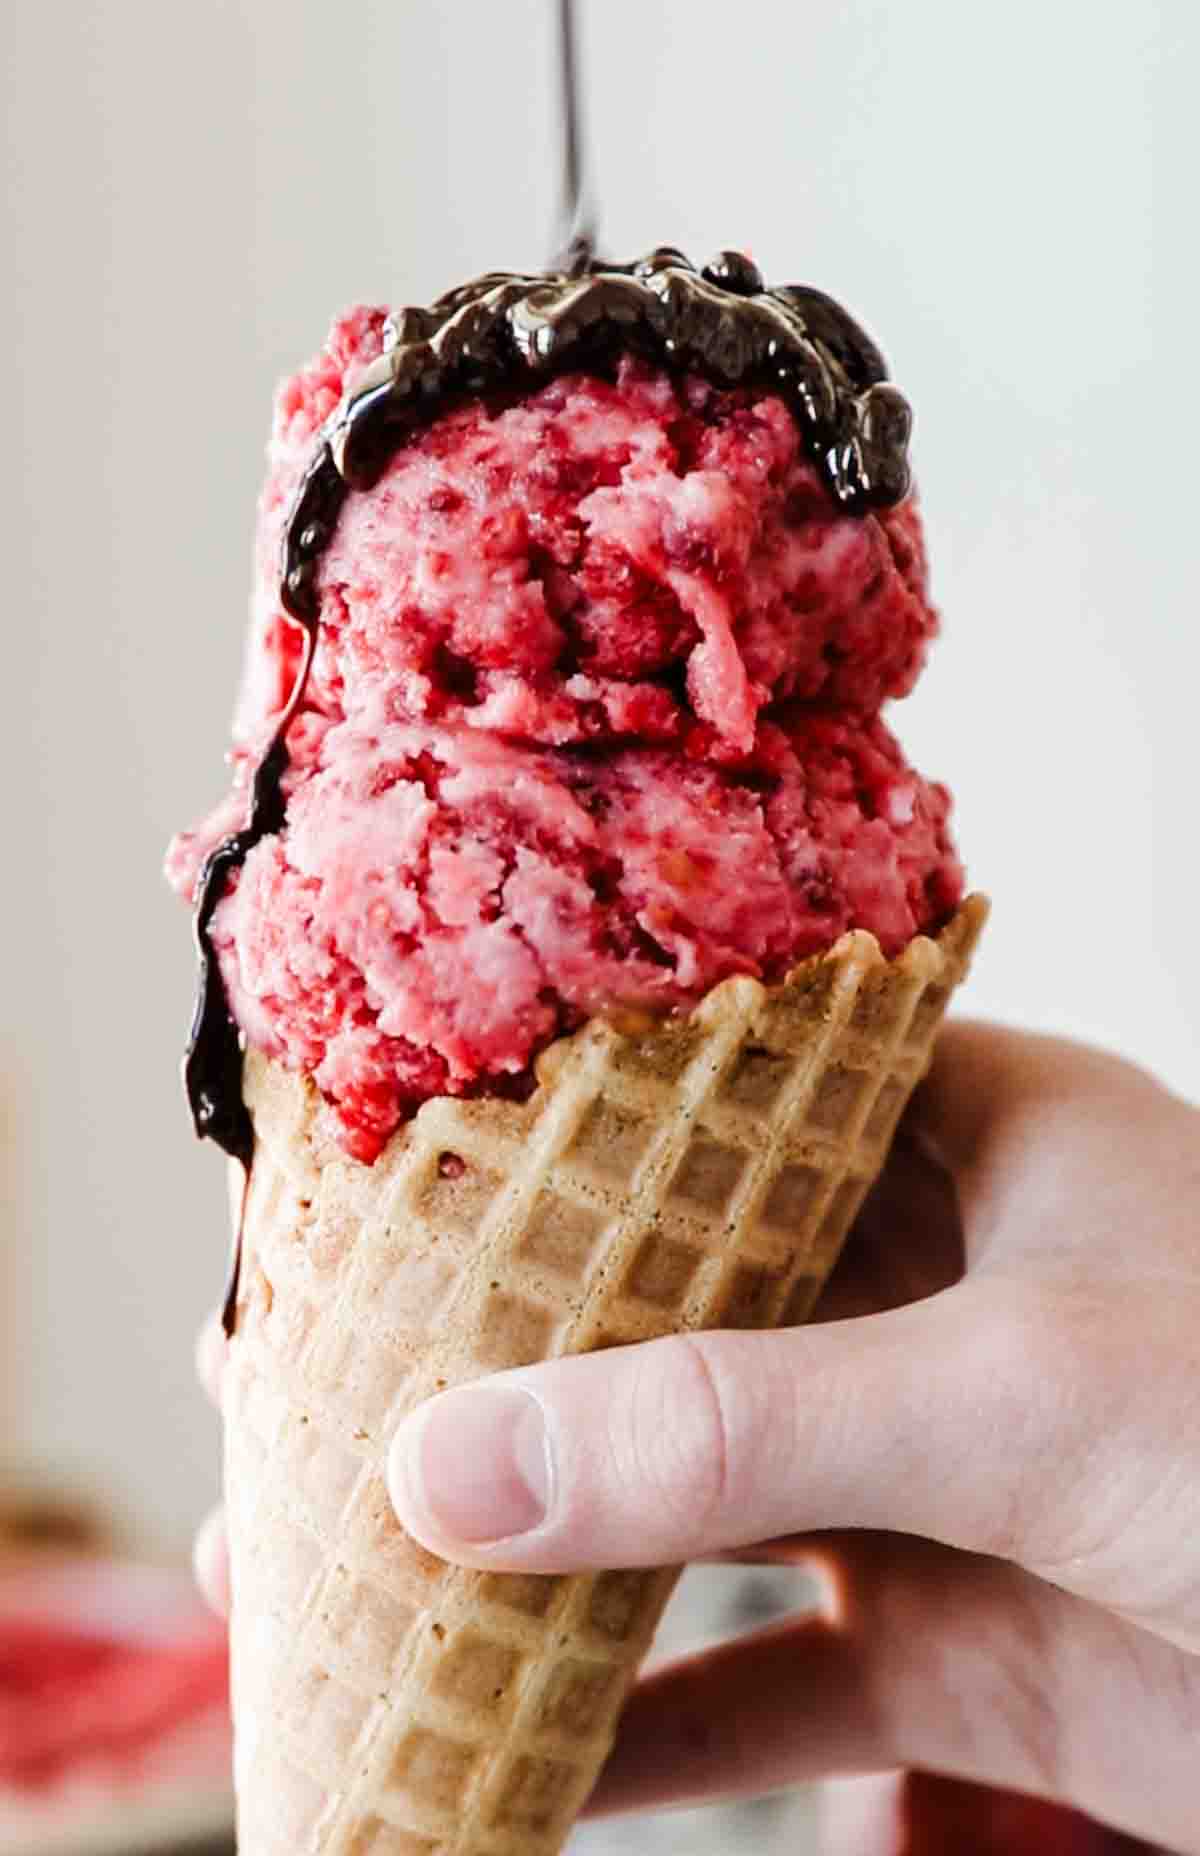 A hand holding a cone filled with raspberry ice cream sorbet.